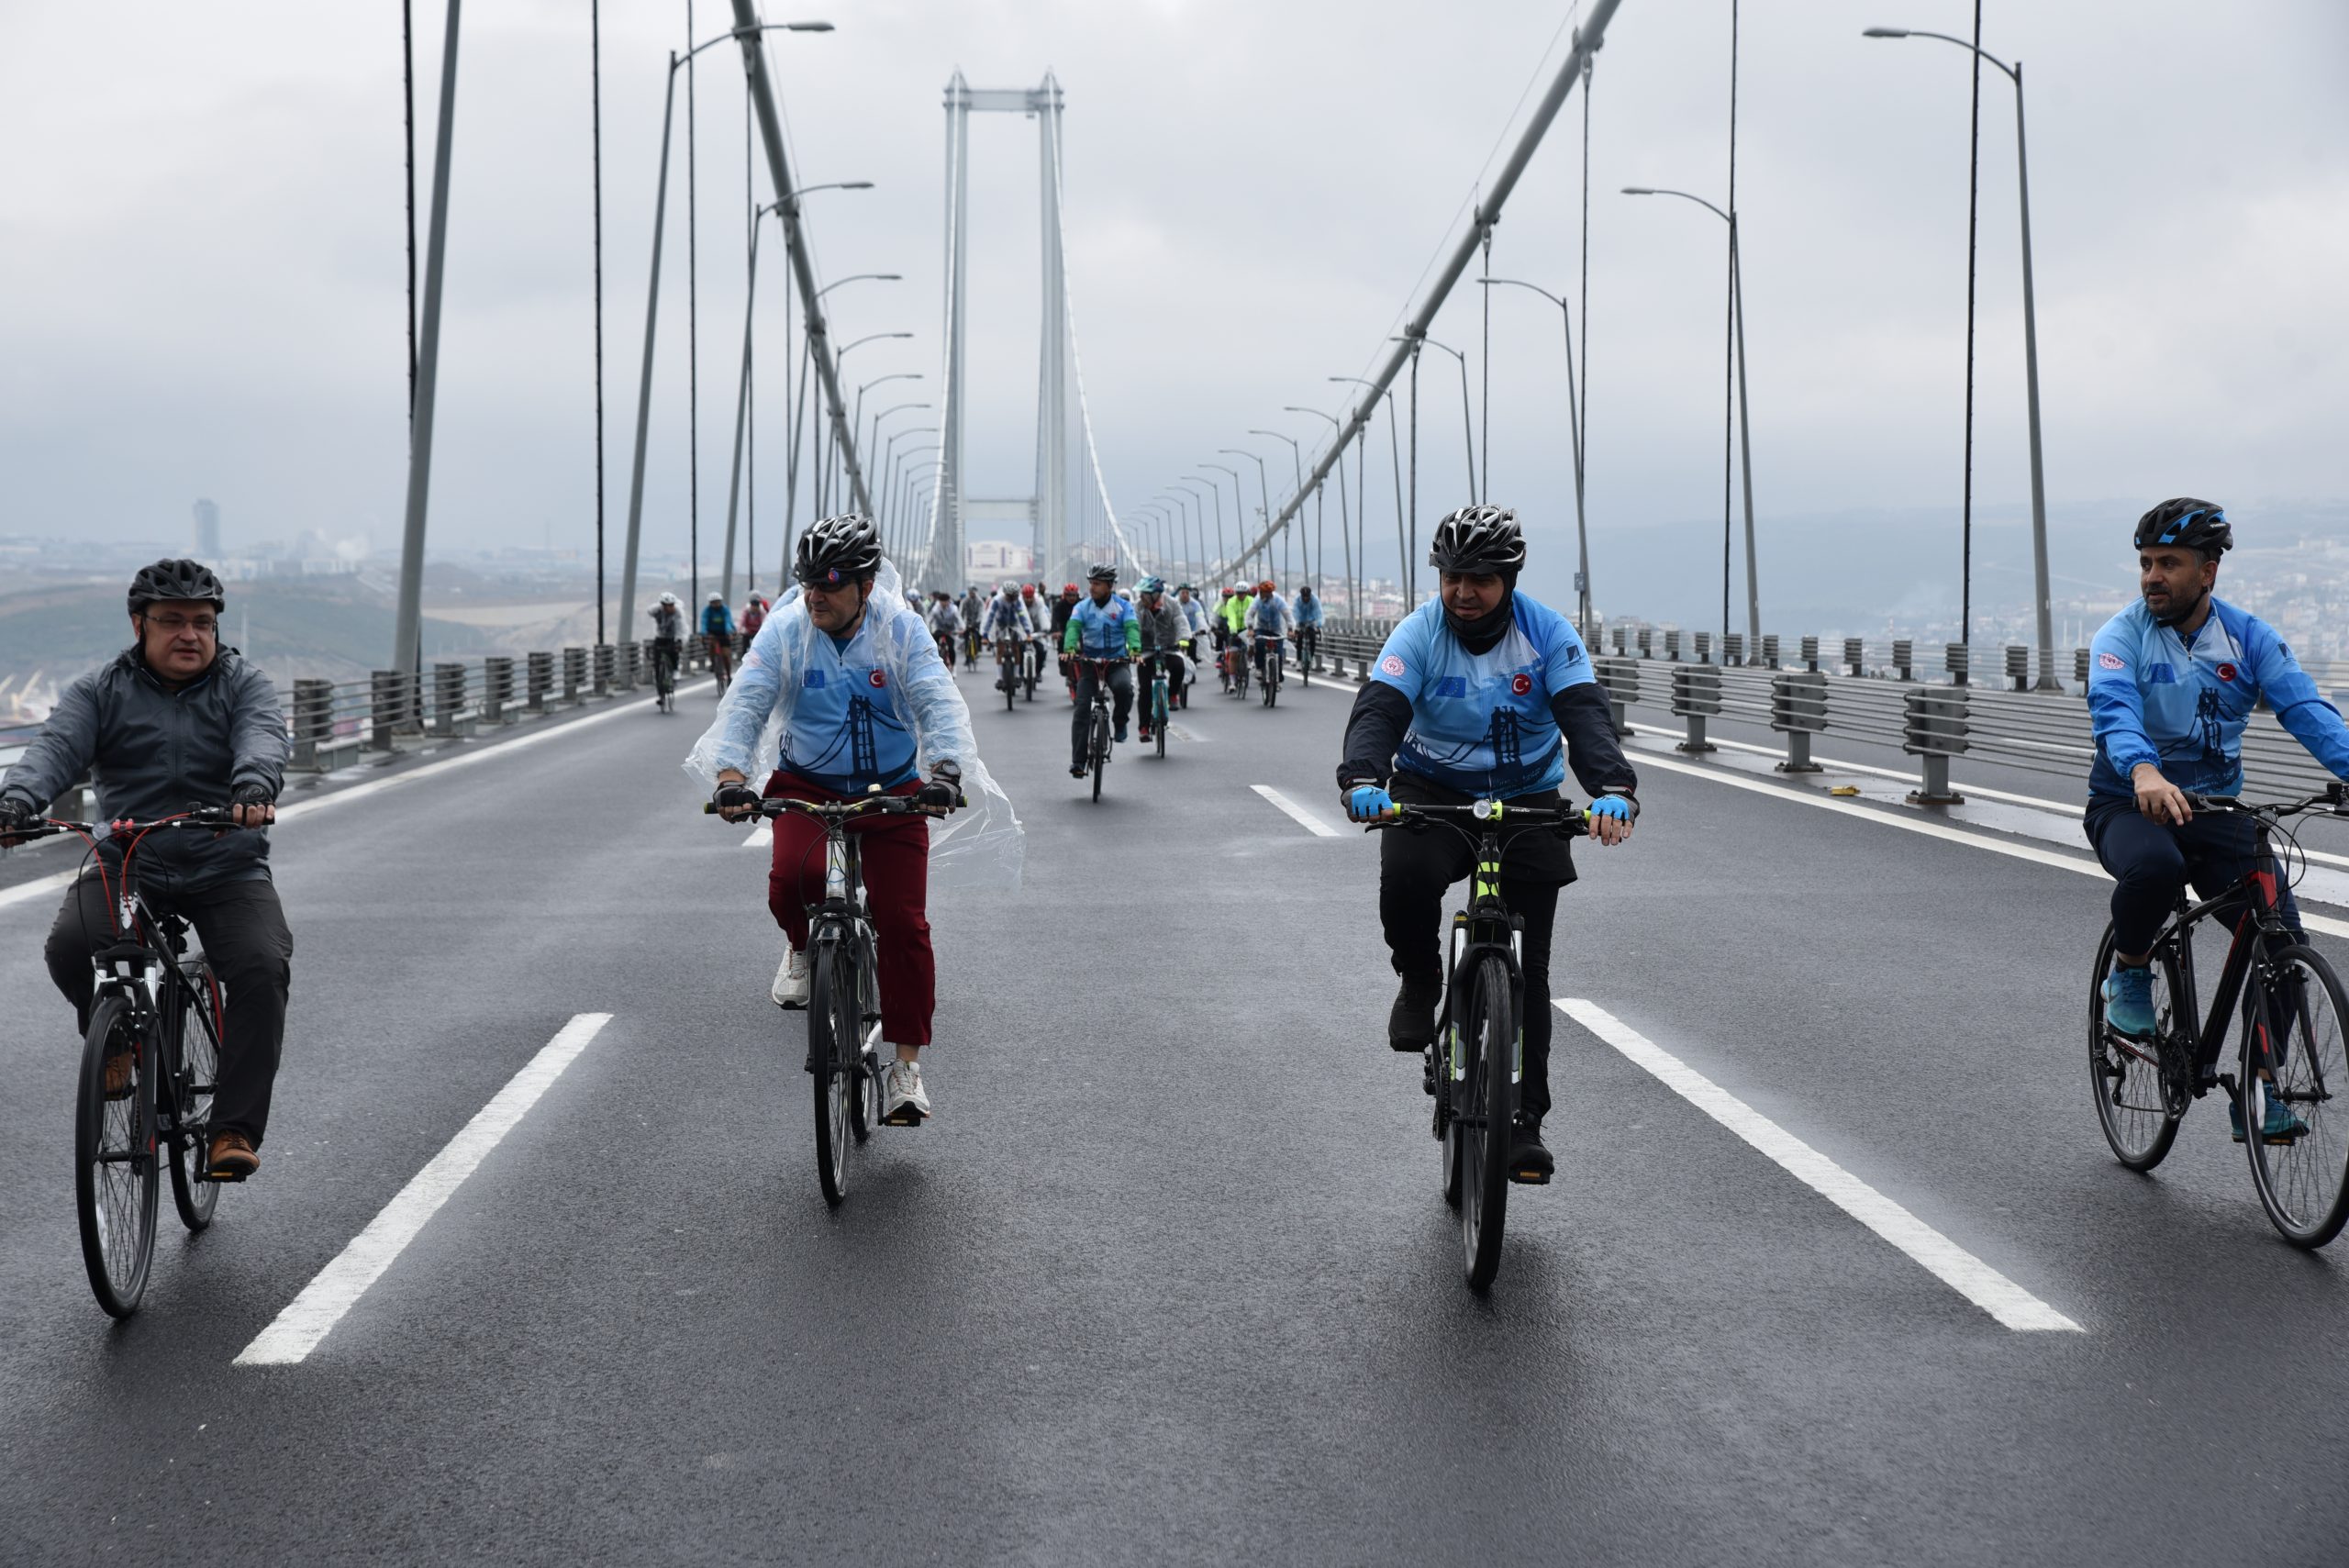 ‘Bike Crossing the Bay’ event was held as part of the EU Climate Diplomacy Week